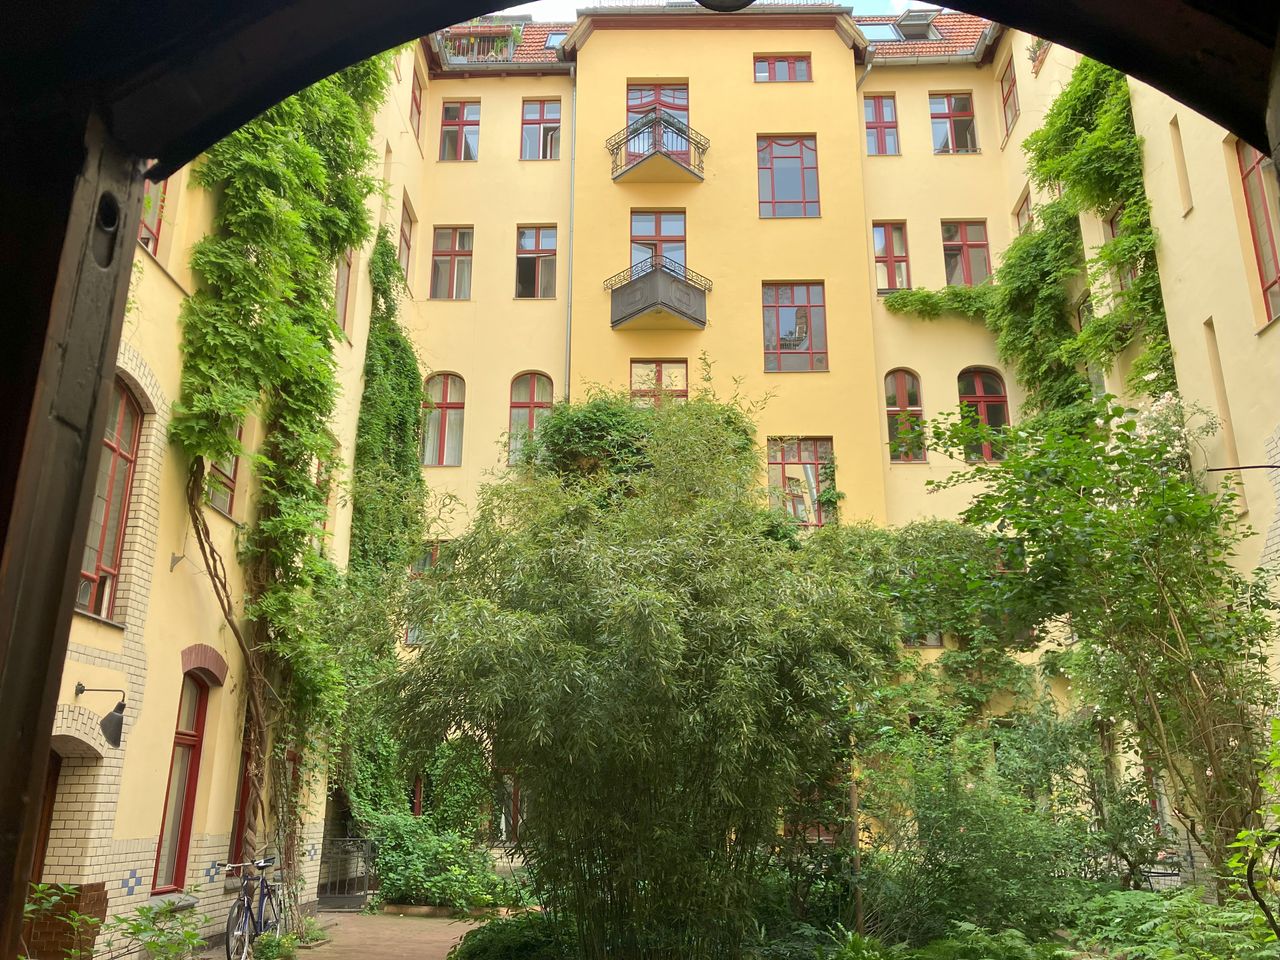 Live in the Heart of Charlottenburg: Historical Landmark with Excellent Connectivity